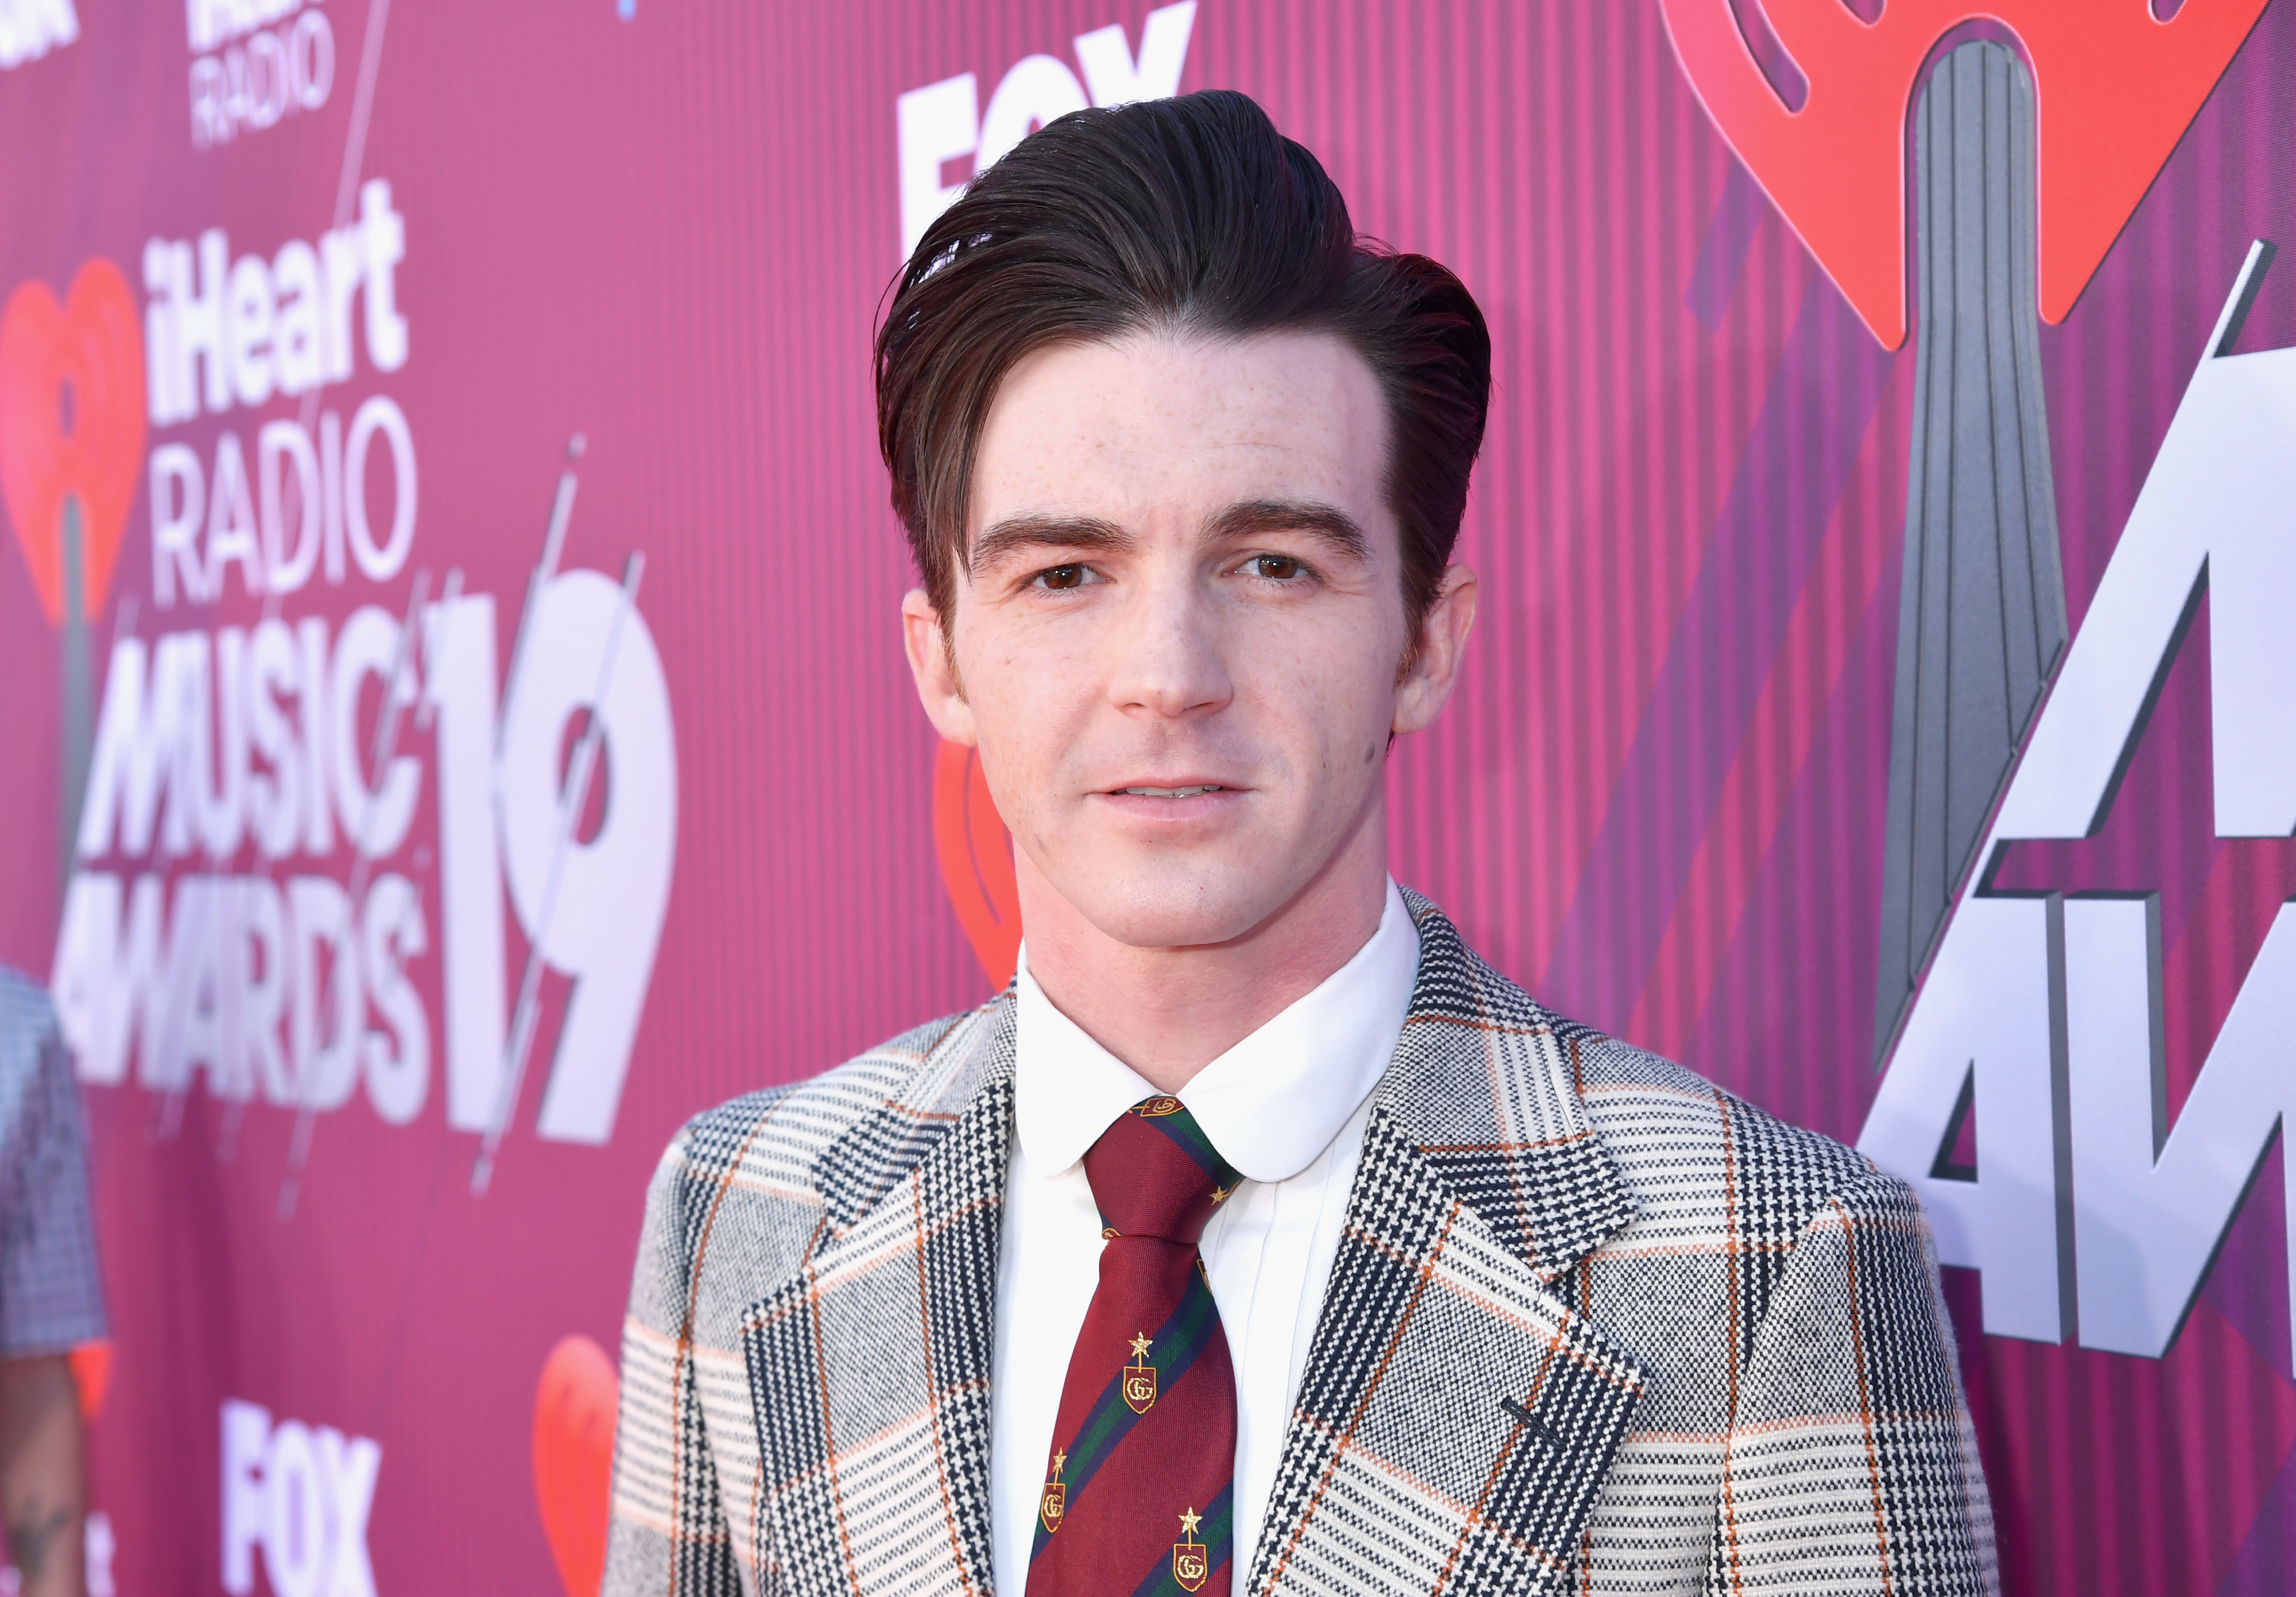 Drake Bell in a patterned suit on the red carpet